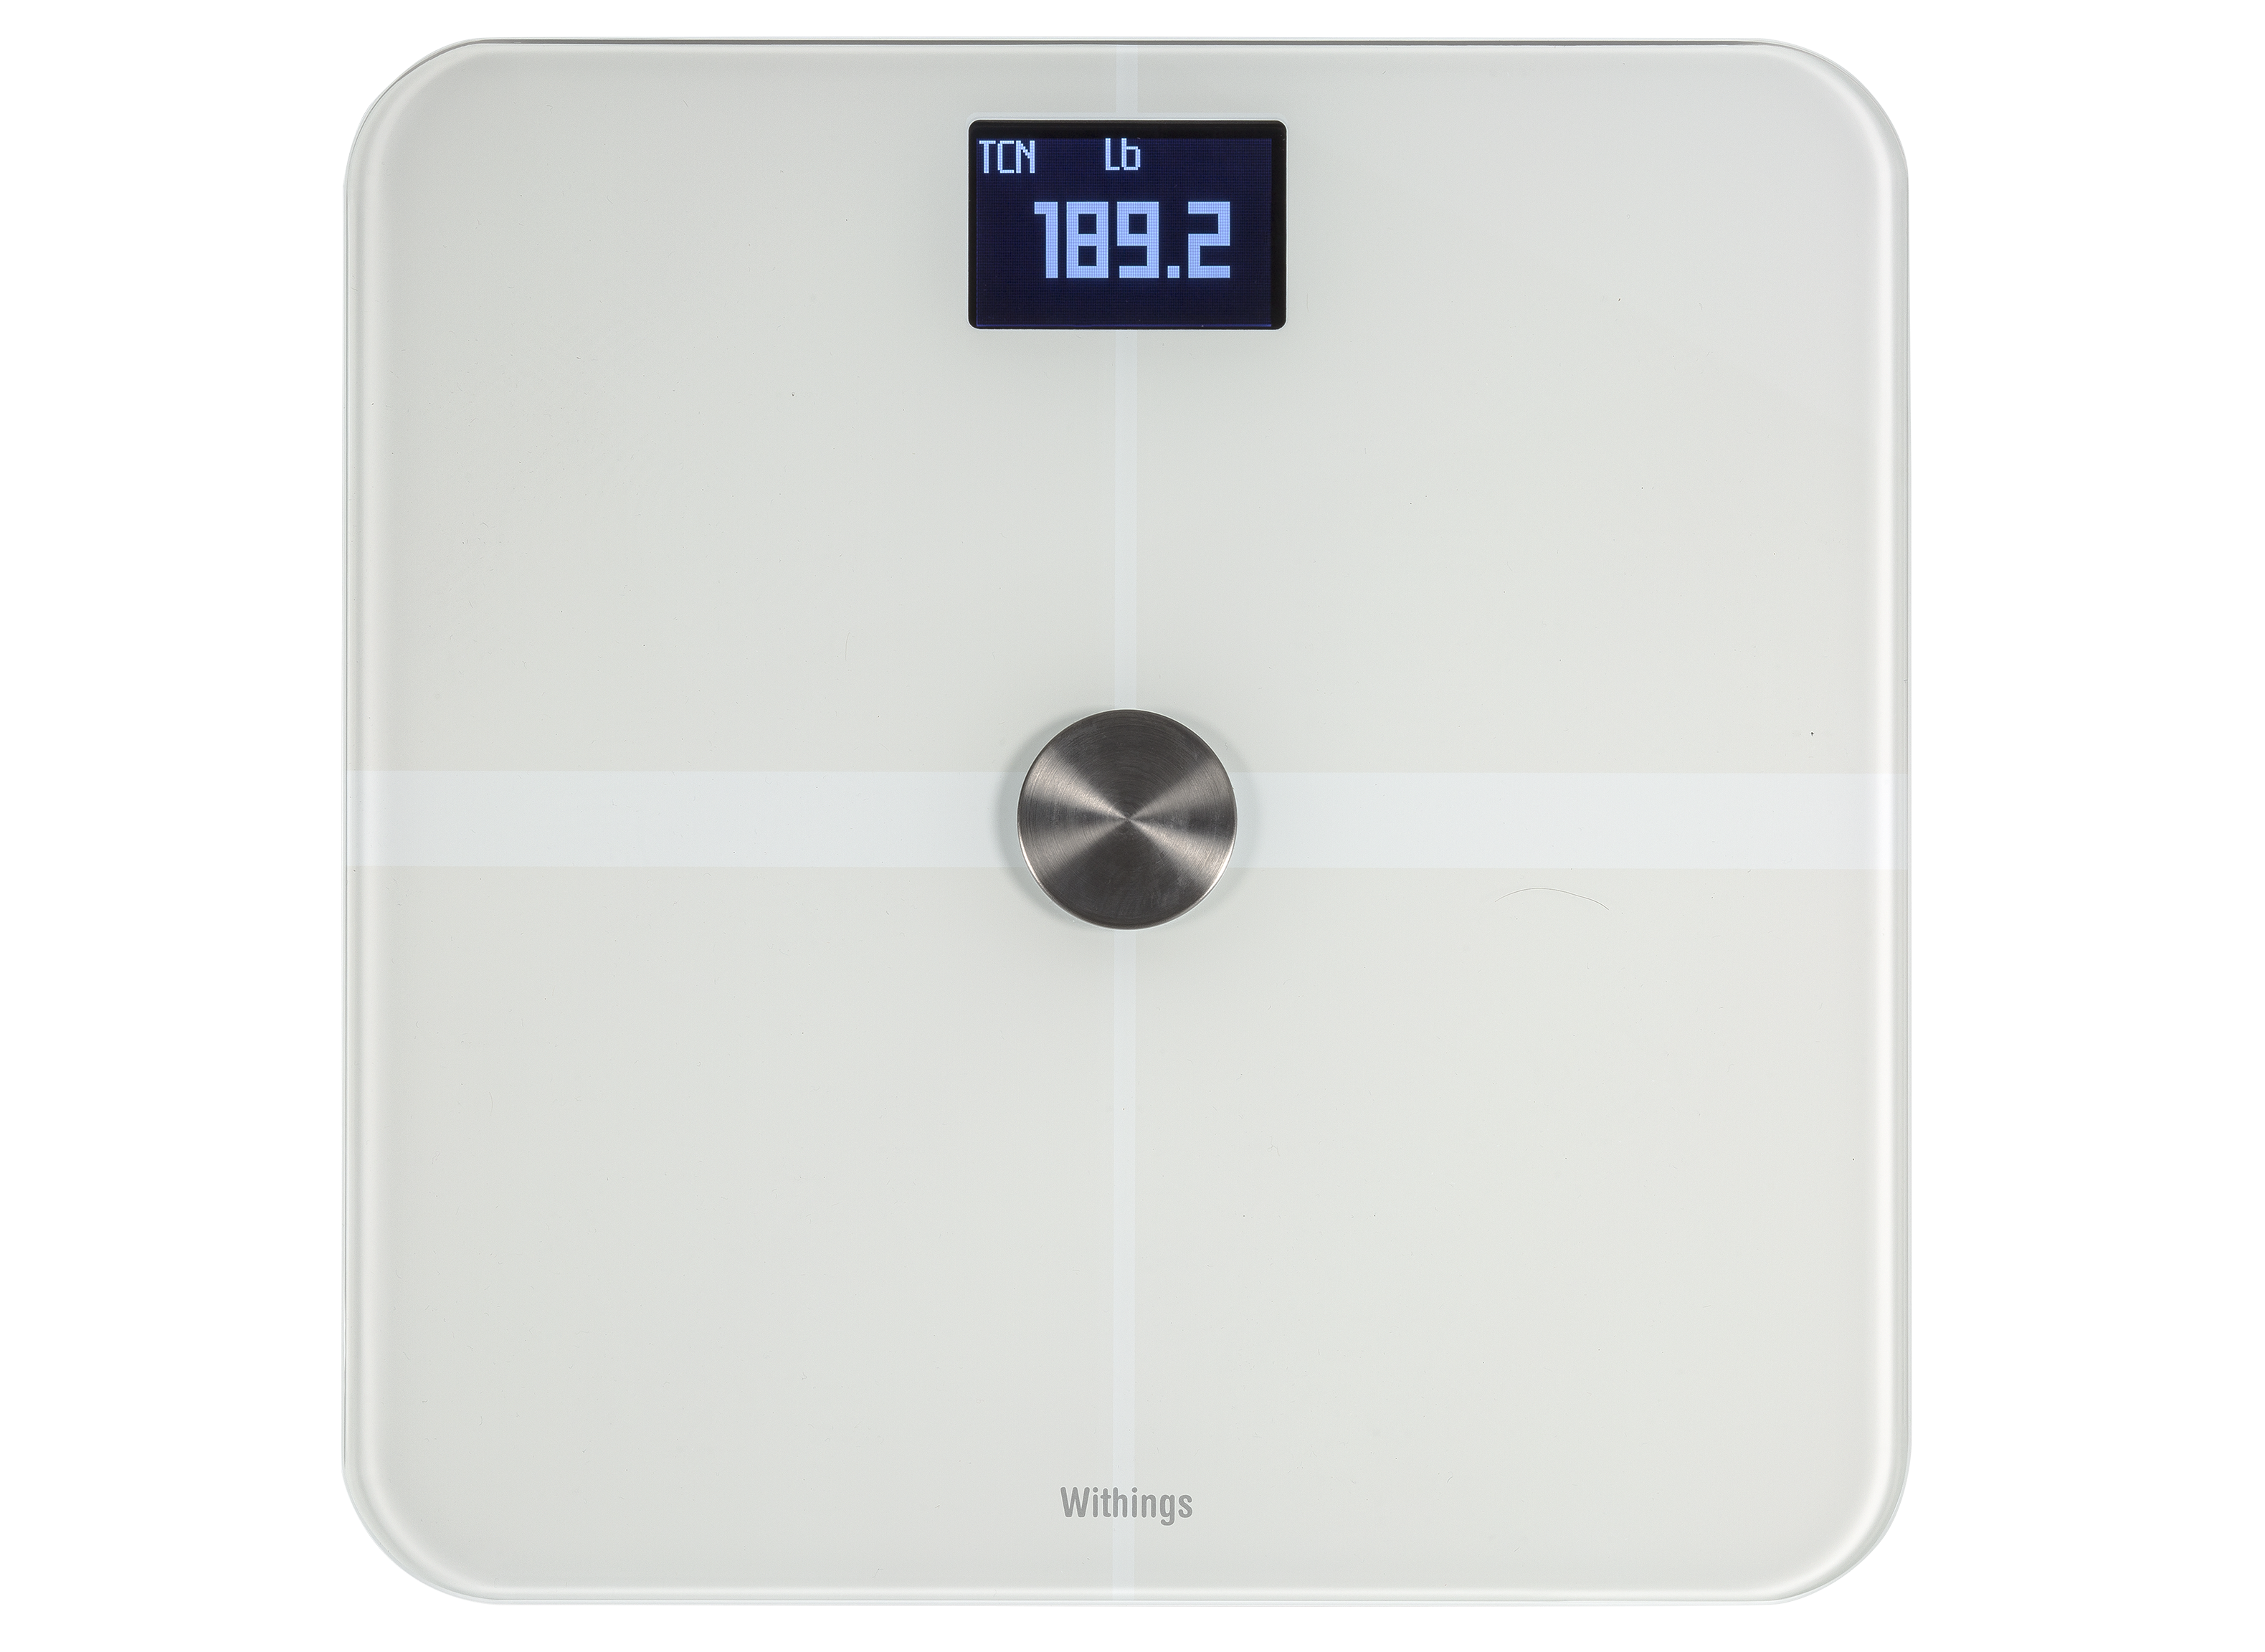 https://crdms.images.consumerreports.org/prod/products/cr/models/384610-bathroomscales-withings-smartbodyanalyzerws50.png